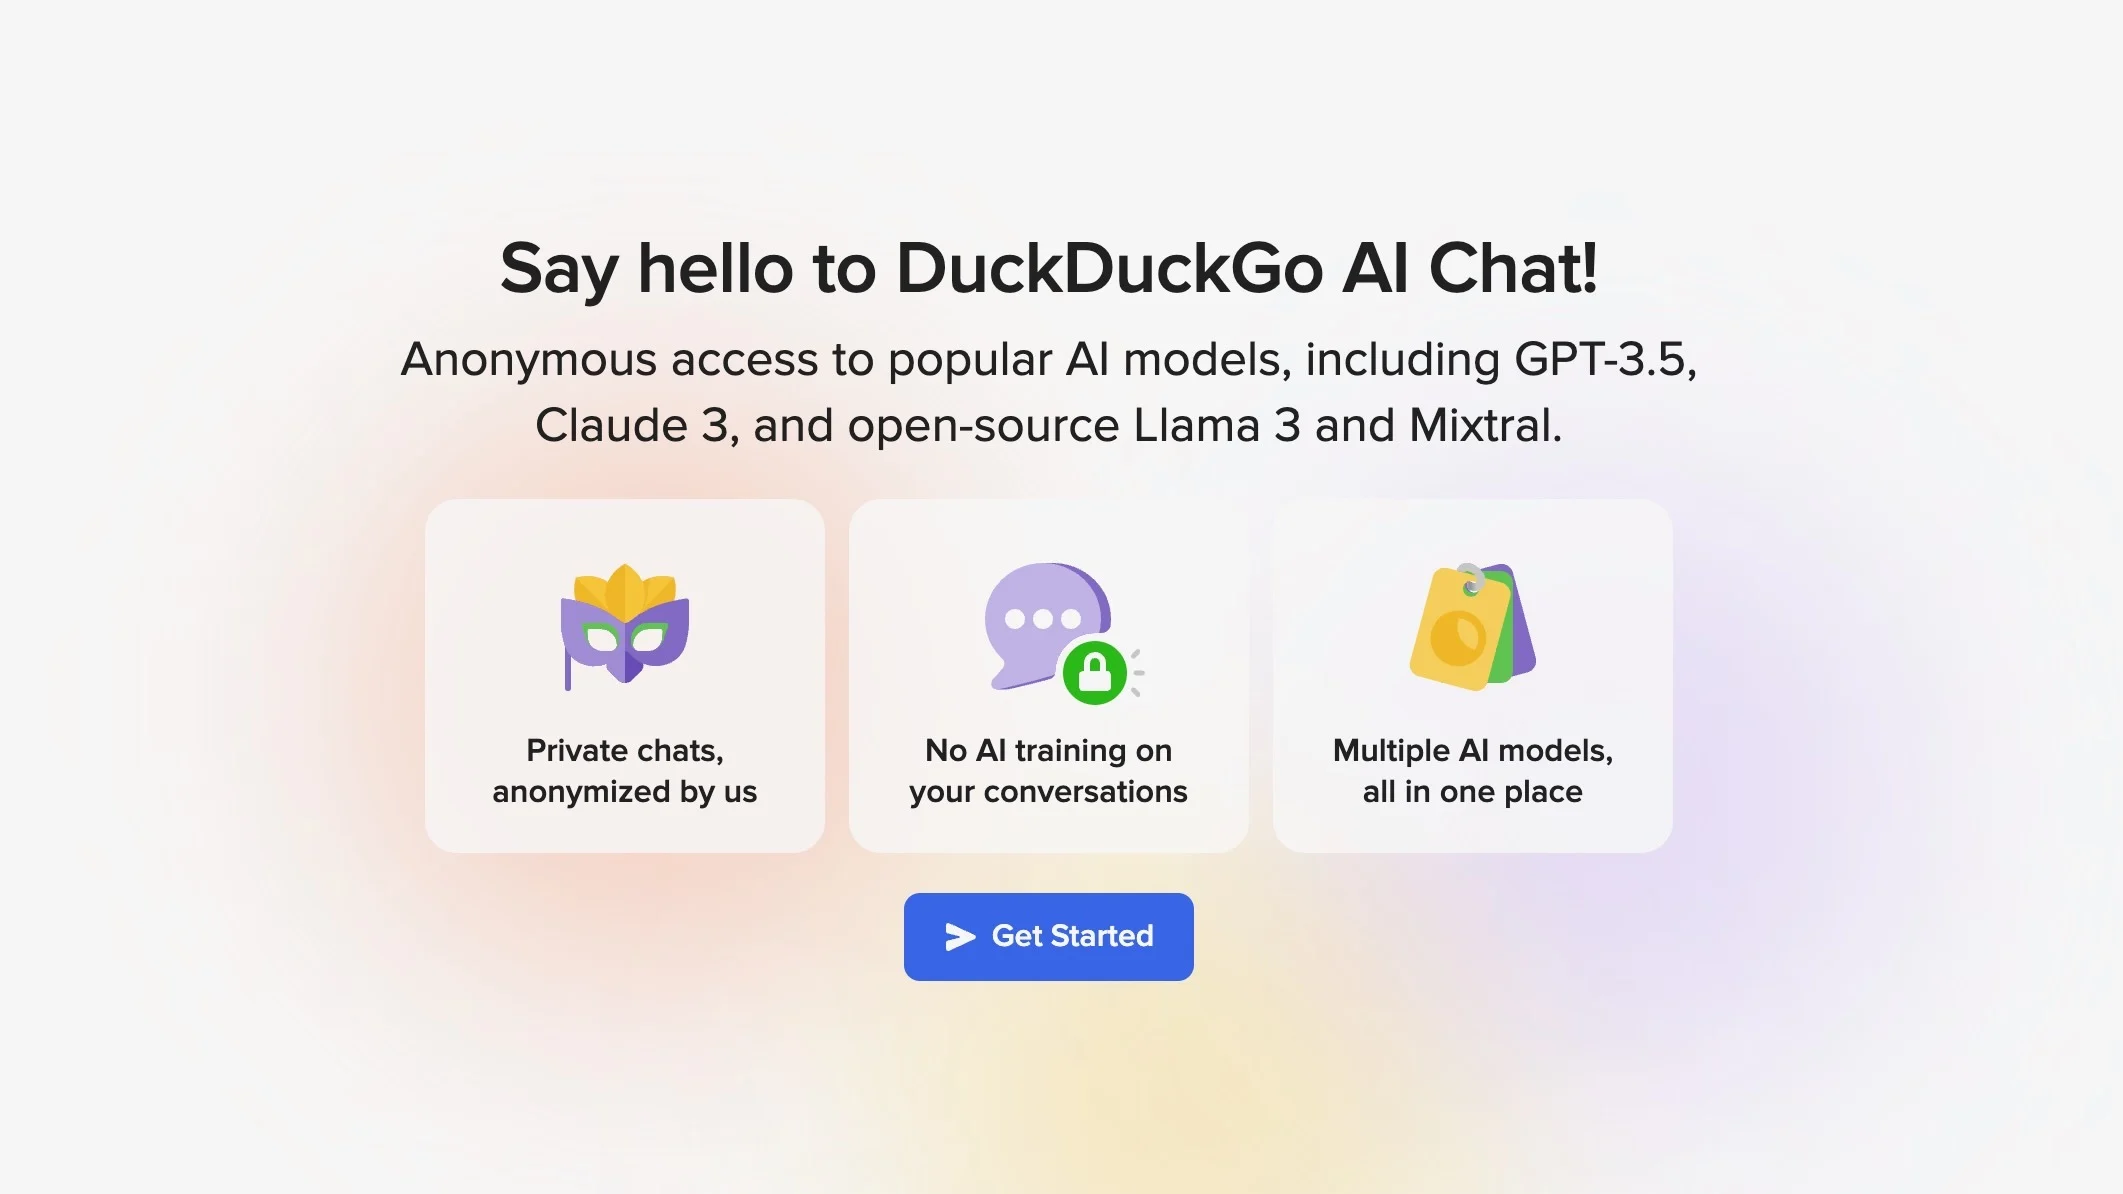 DuckDuckGo offers AI Chat with a focus on privacy